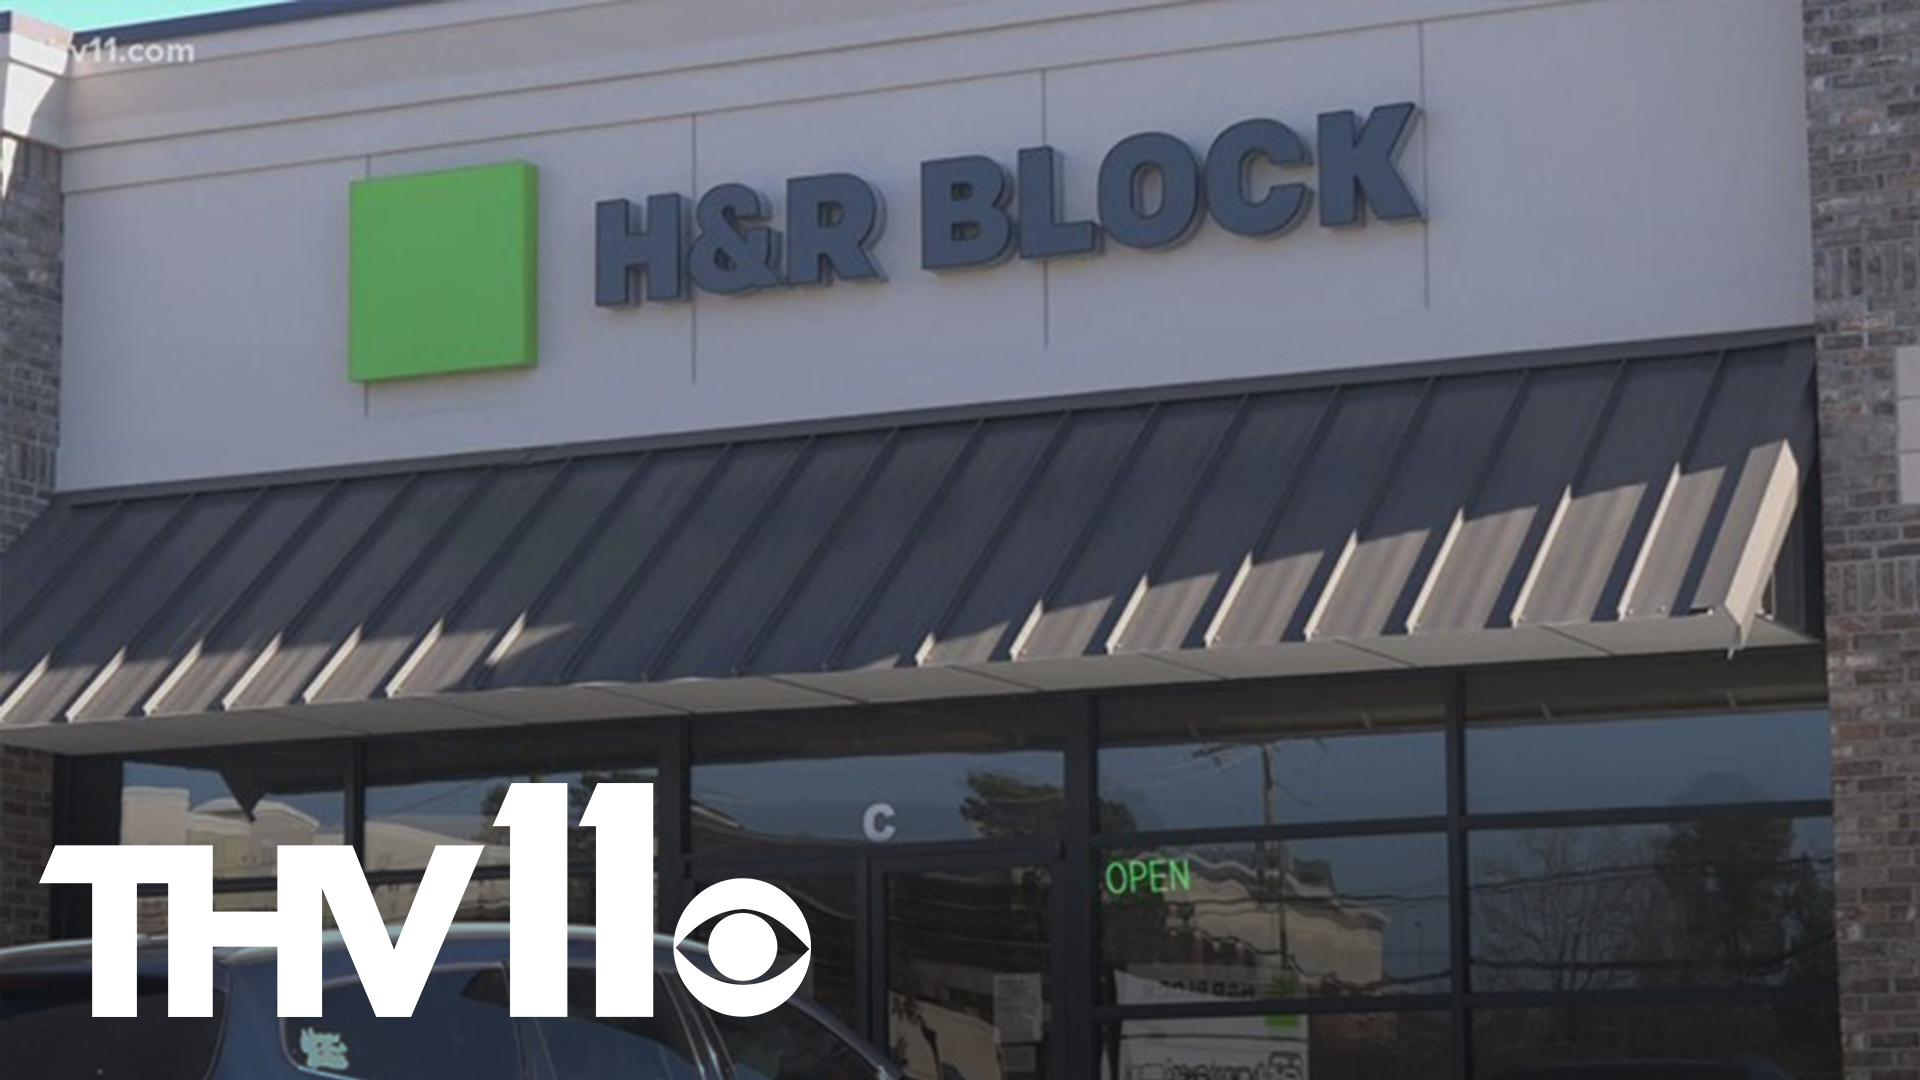 Millions of H&R Block customers are trying to track down their stimulus money. There's a glitch in the process of getting the funds from the IRS.